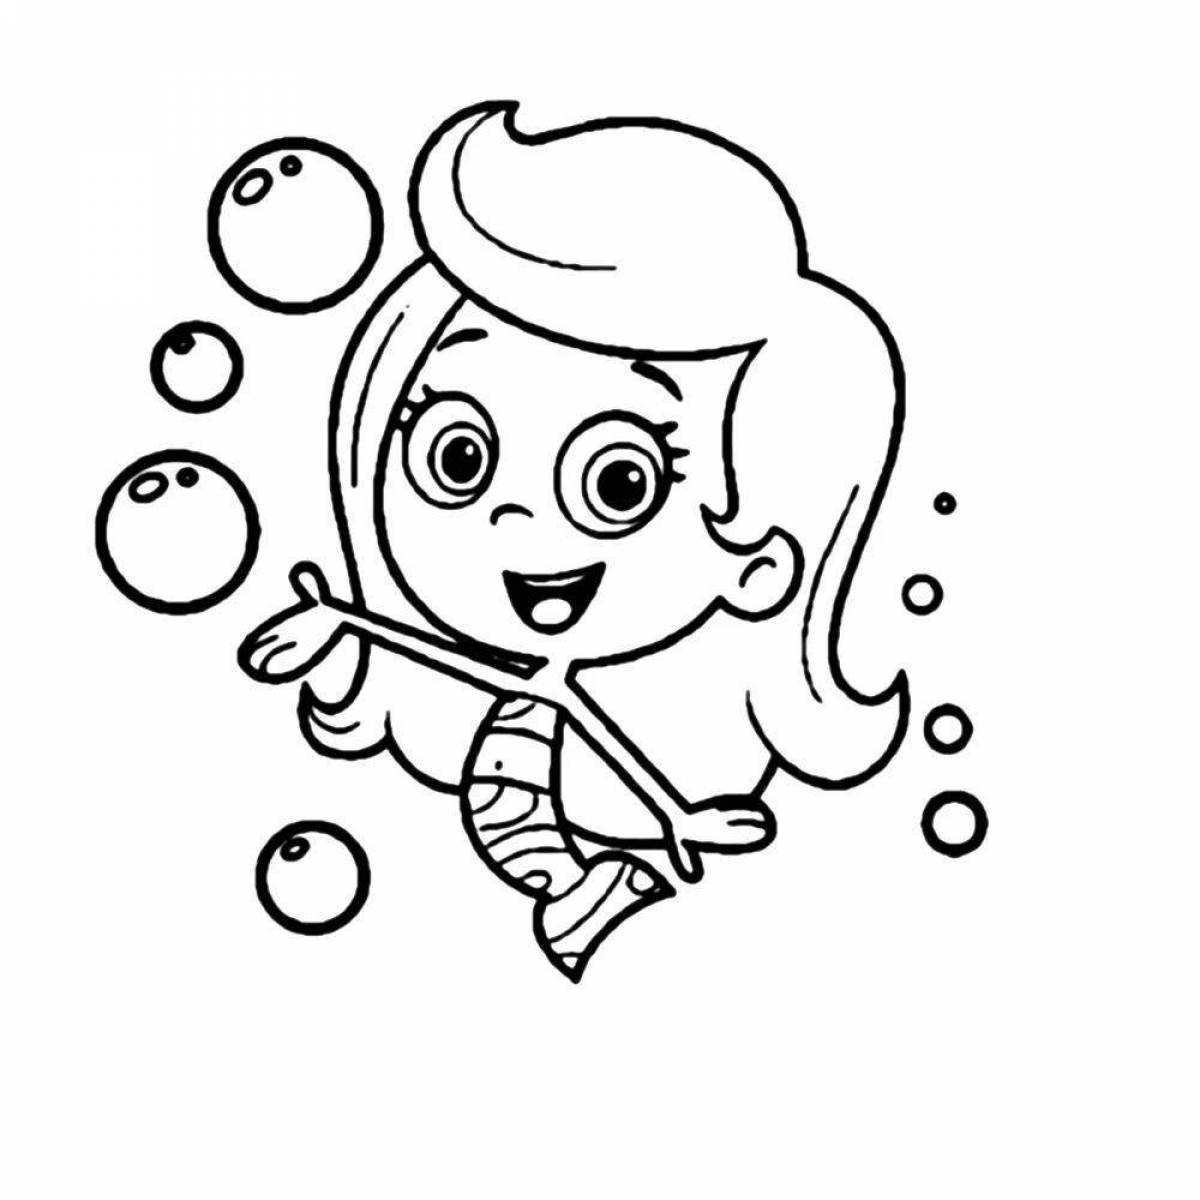 Smart and wonder bag coloring page